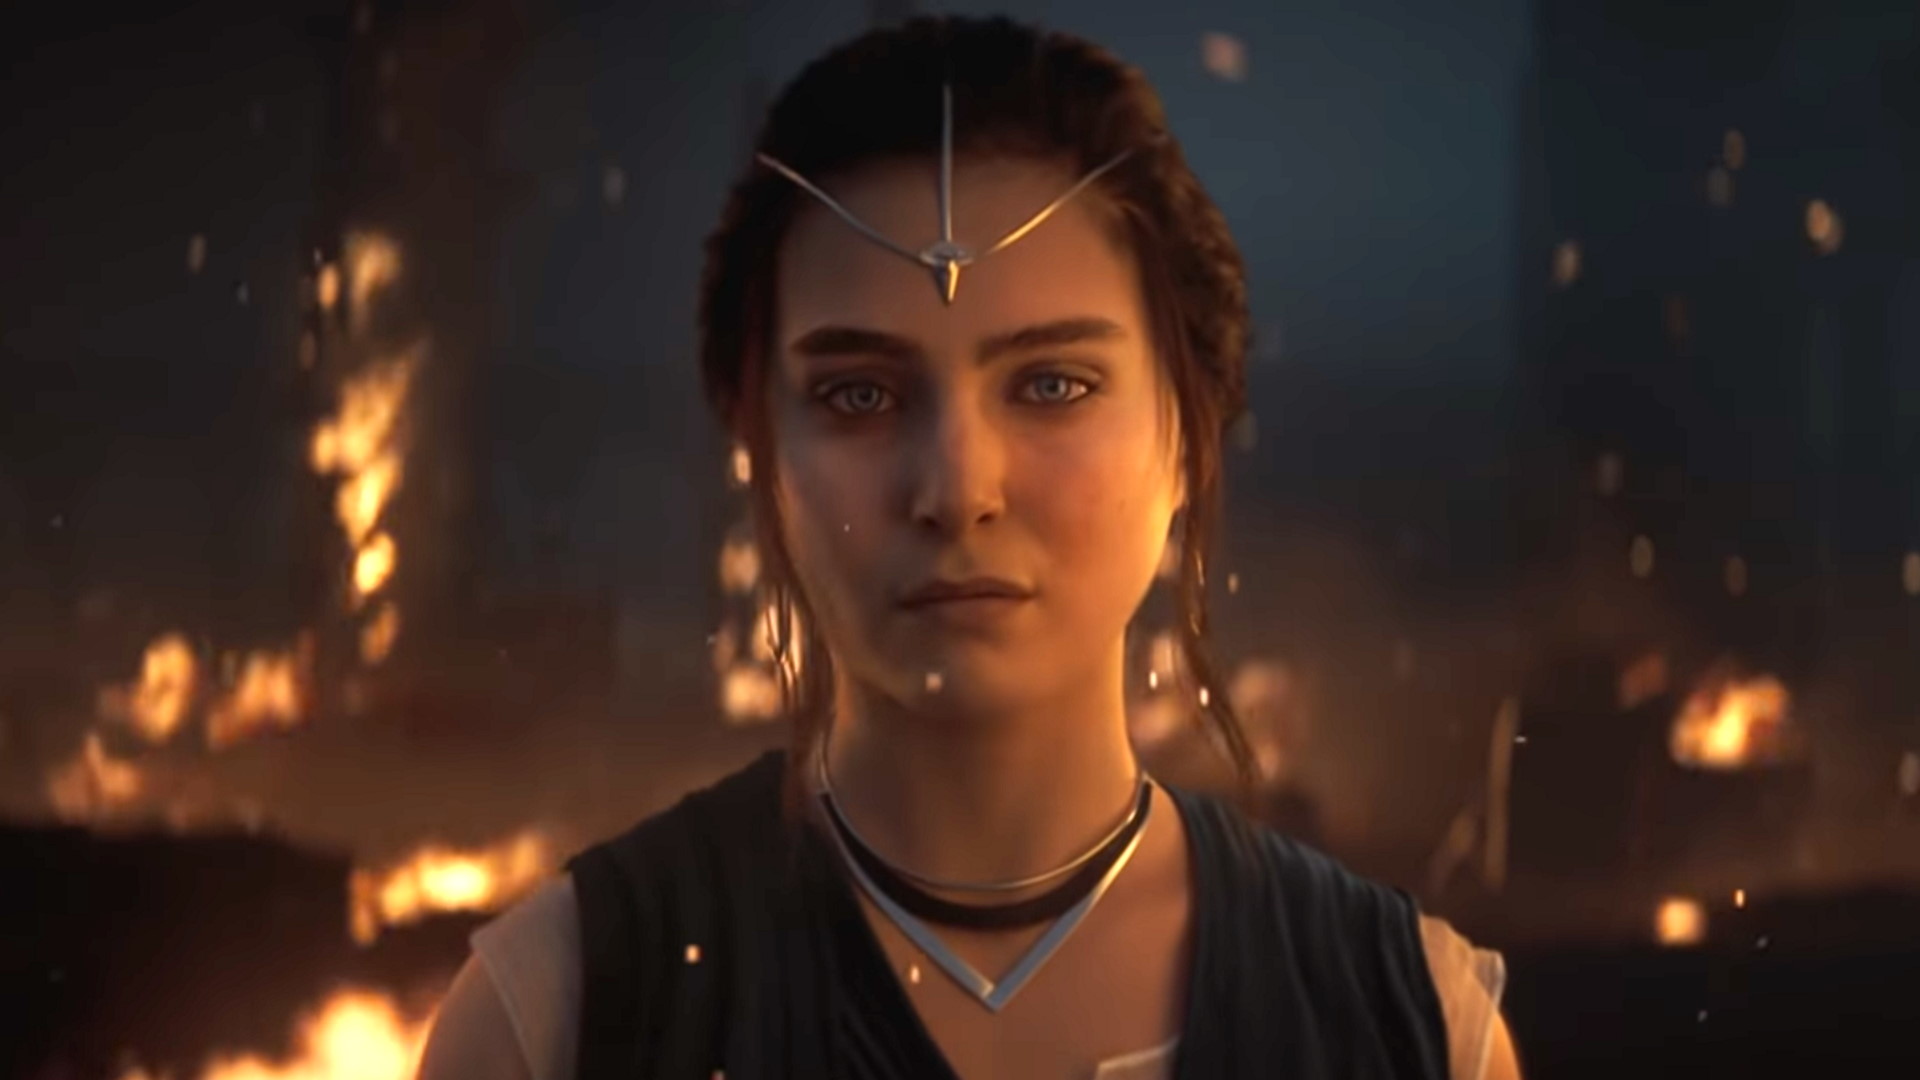 THE GAME AWARDS 2021: Official Livestream with Hellblade II, Star Wars  Eclipse, Sonic, Matrix 